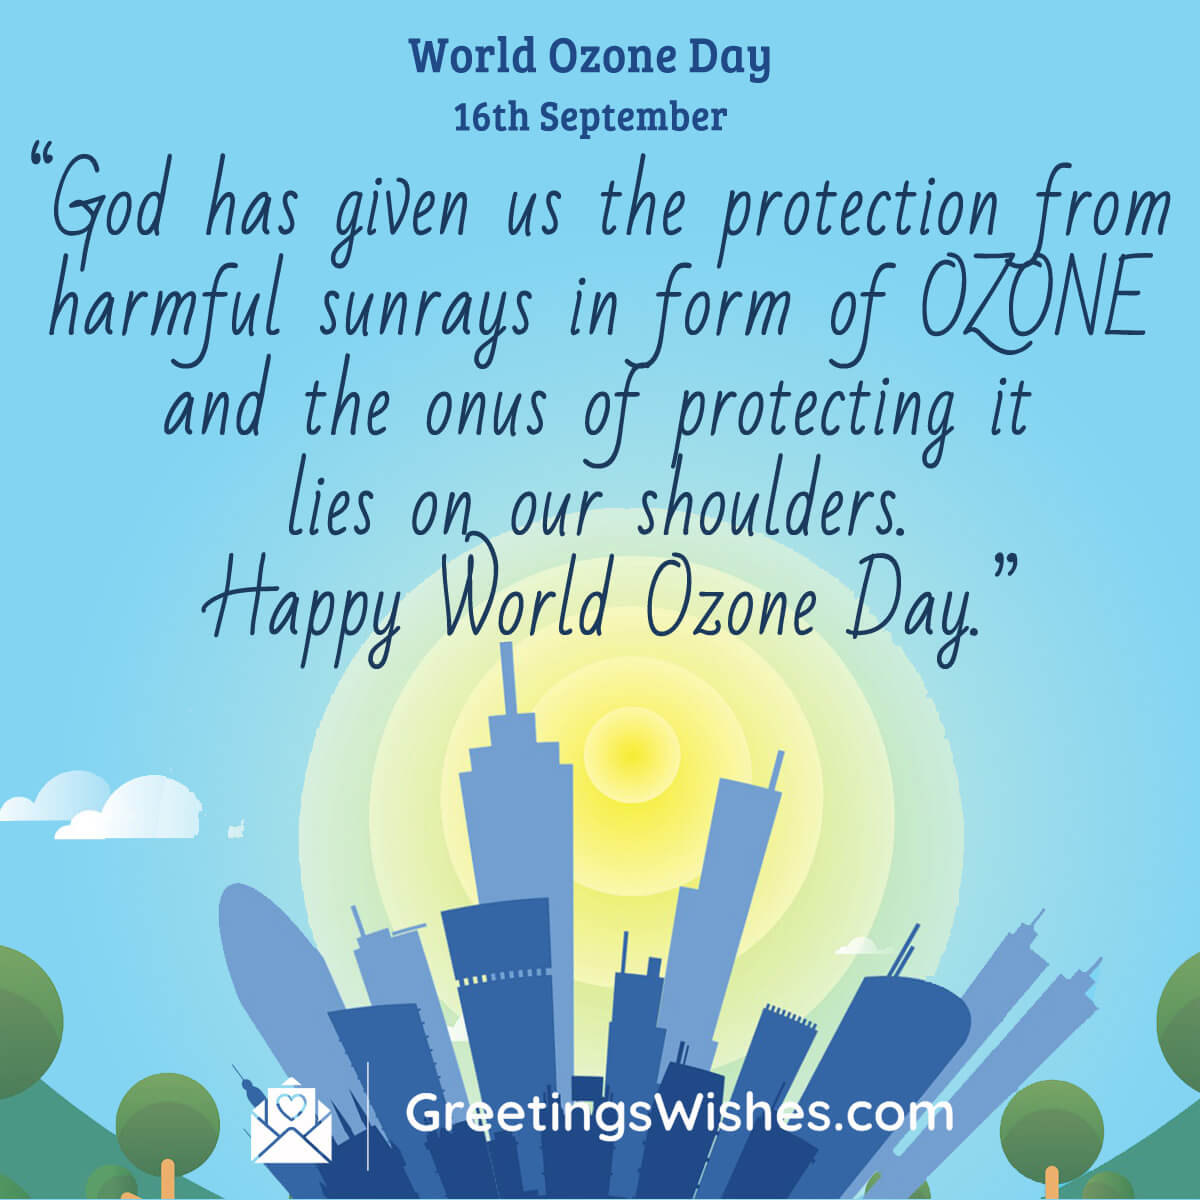 World Ozone Day Wishes (16th September)